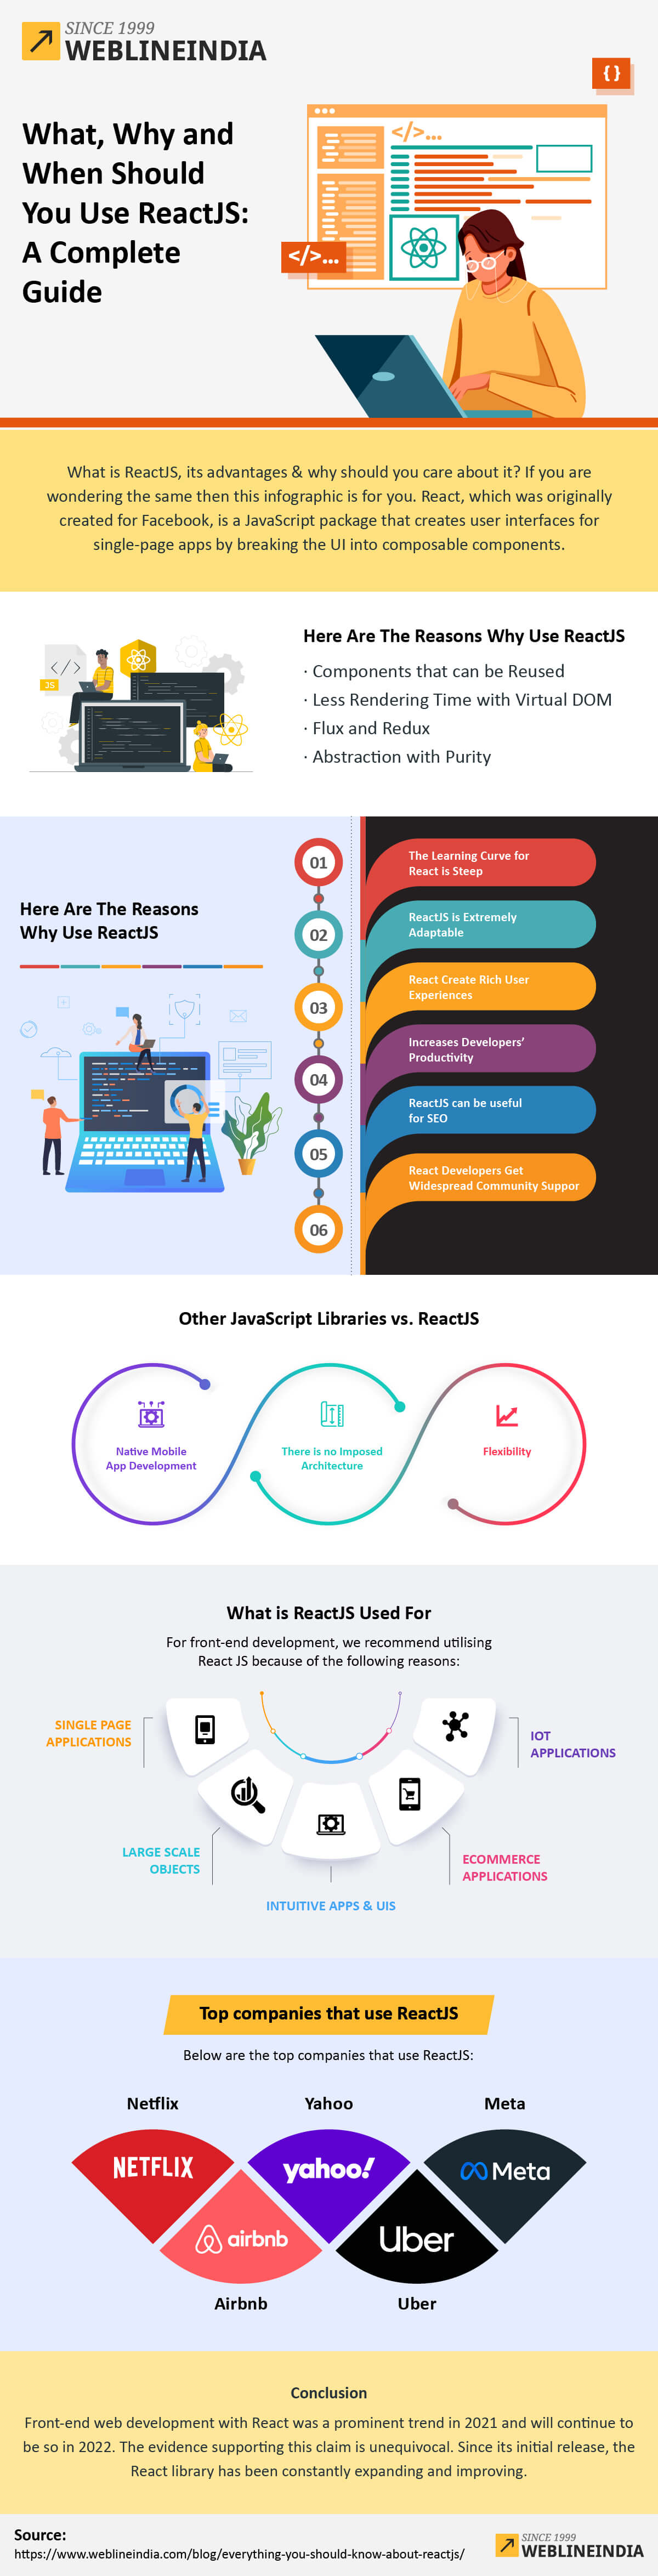 What, Why and When Should You Use ReactJS: A Complete Guide Infographic